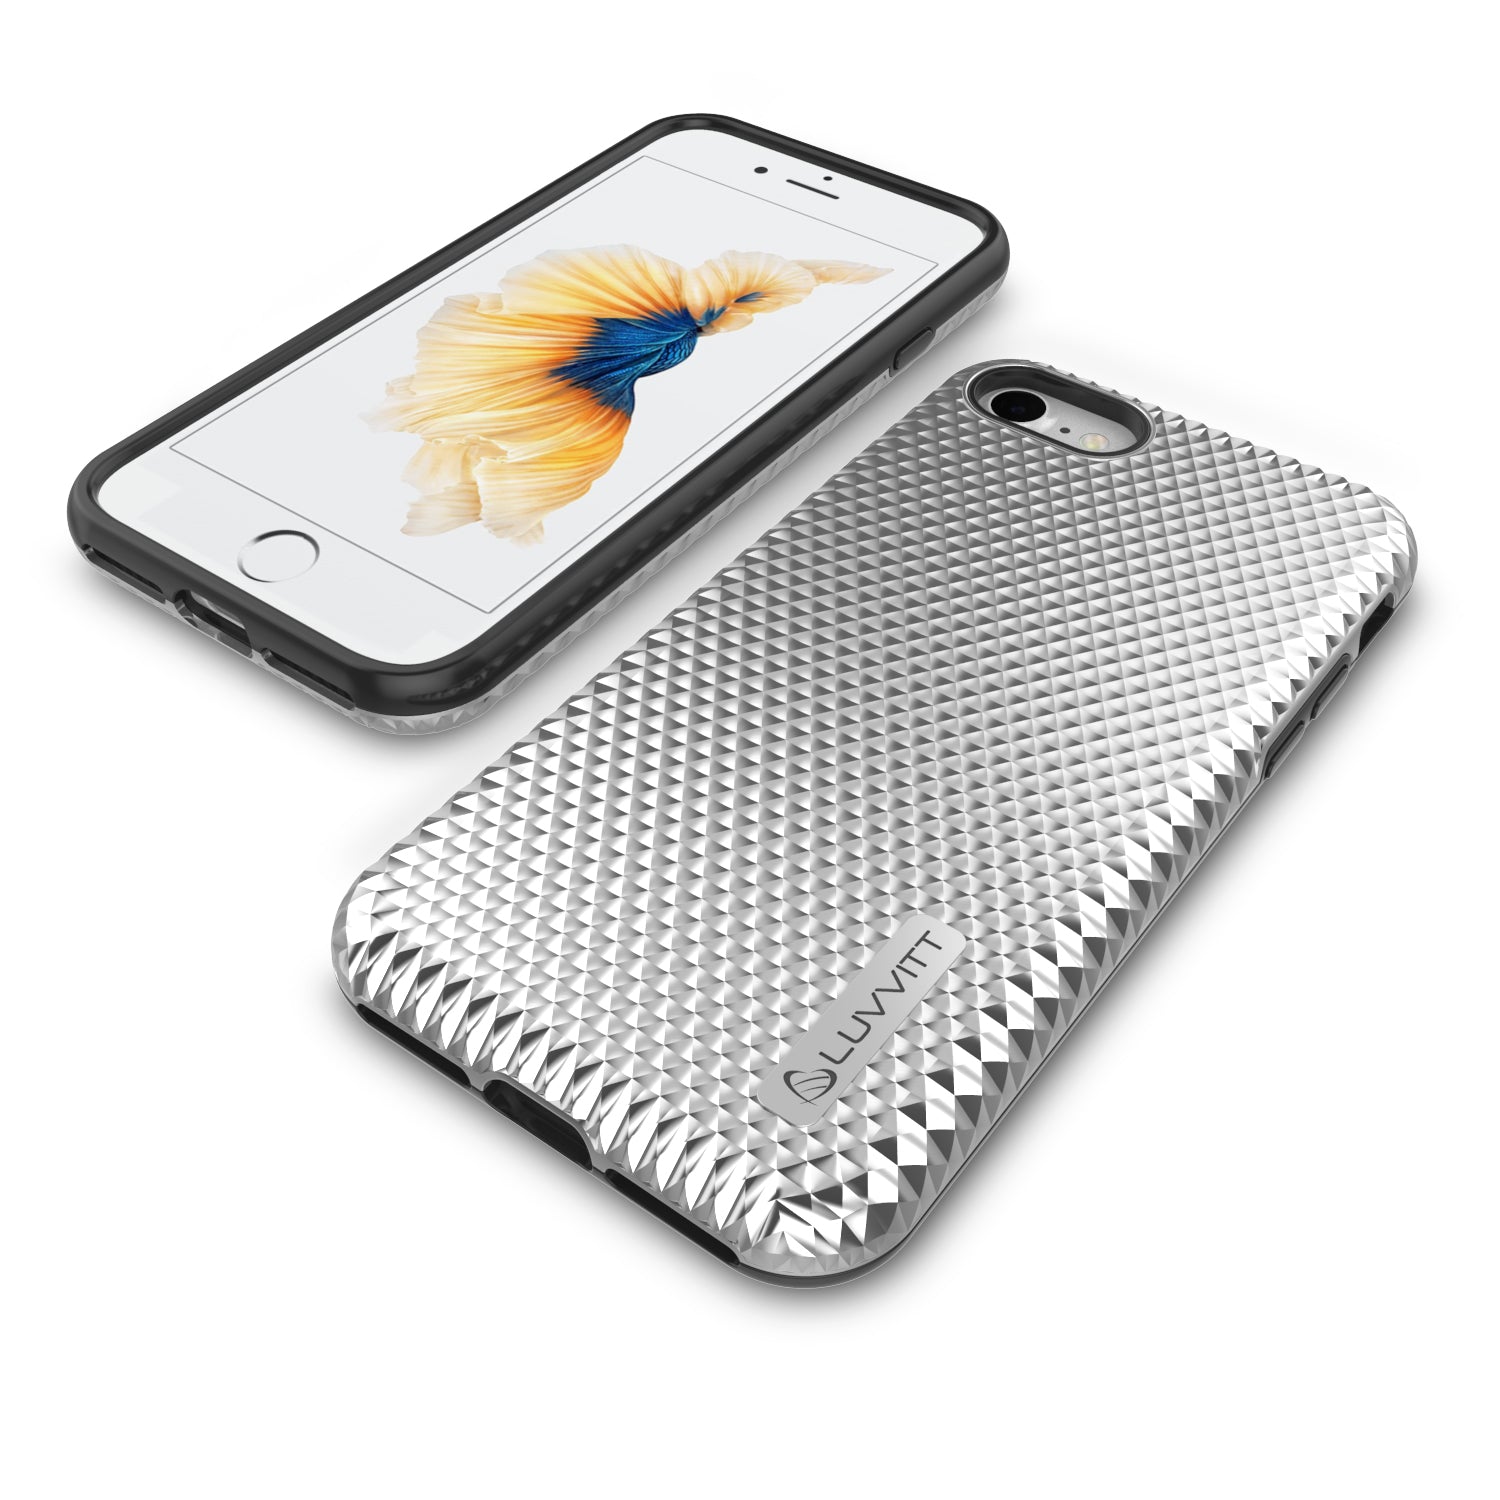 Luvvitt Brilliant Armor Fashion Case for iPhone SE 2020 / iPhone 7 / iPhone 8 - Silver